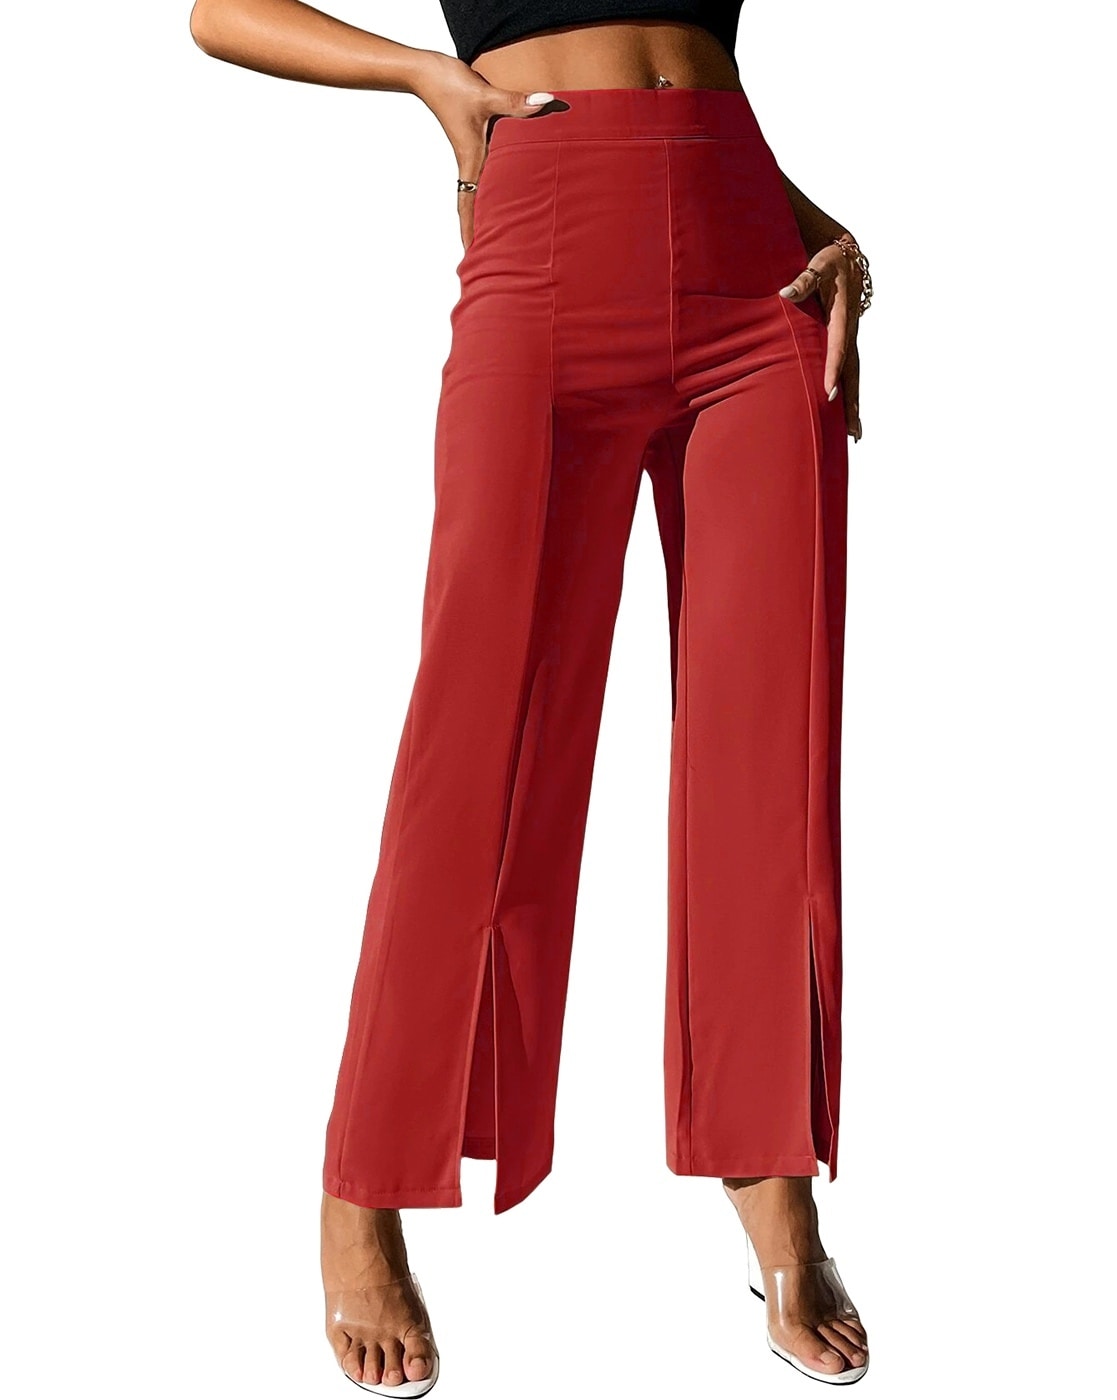 Red Wide Leg Pants With High Front Slit, Red High Waist Palazzo Pants for  Women, Special Event Women's High Rise Pants -  Canada